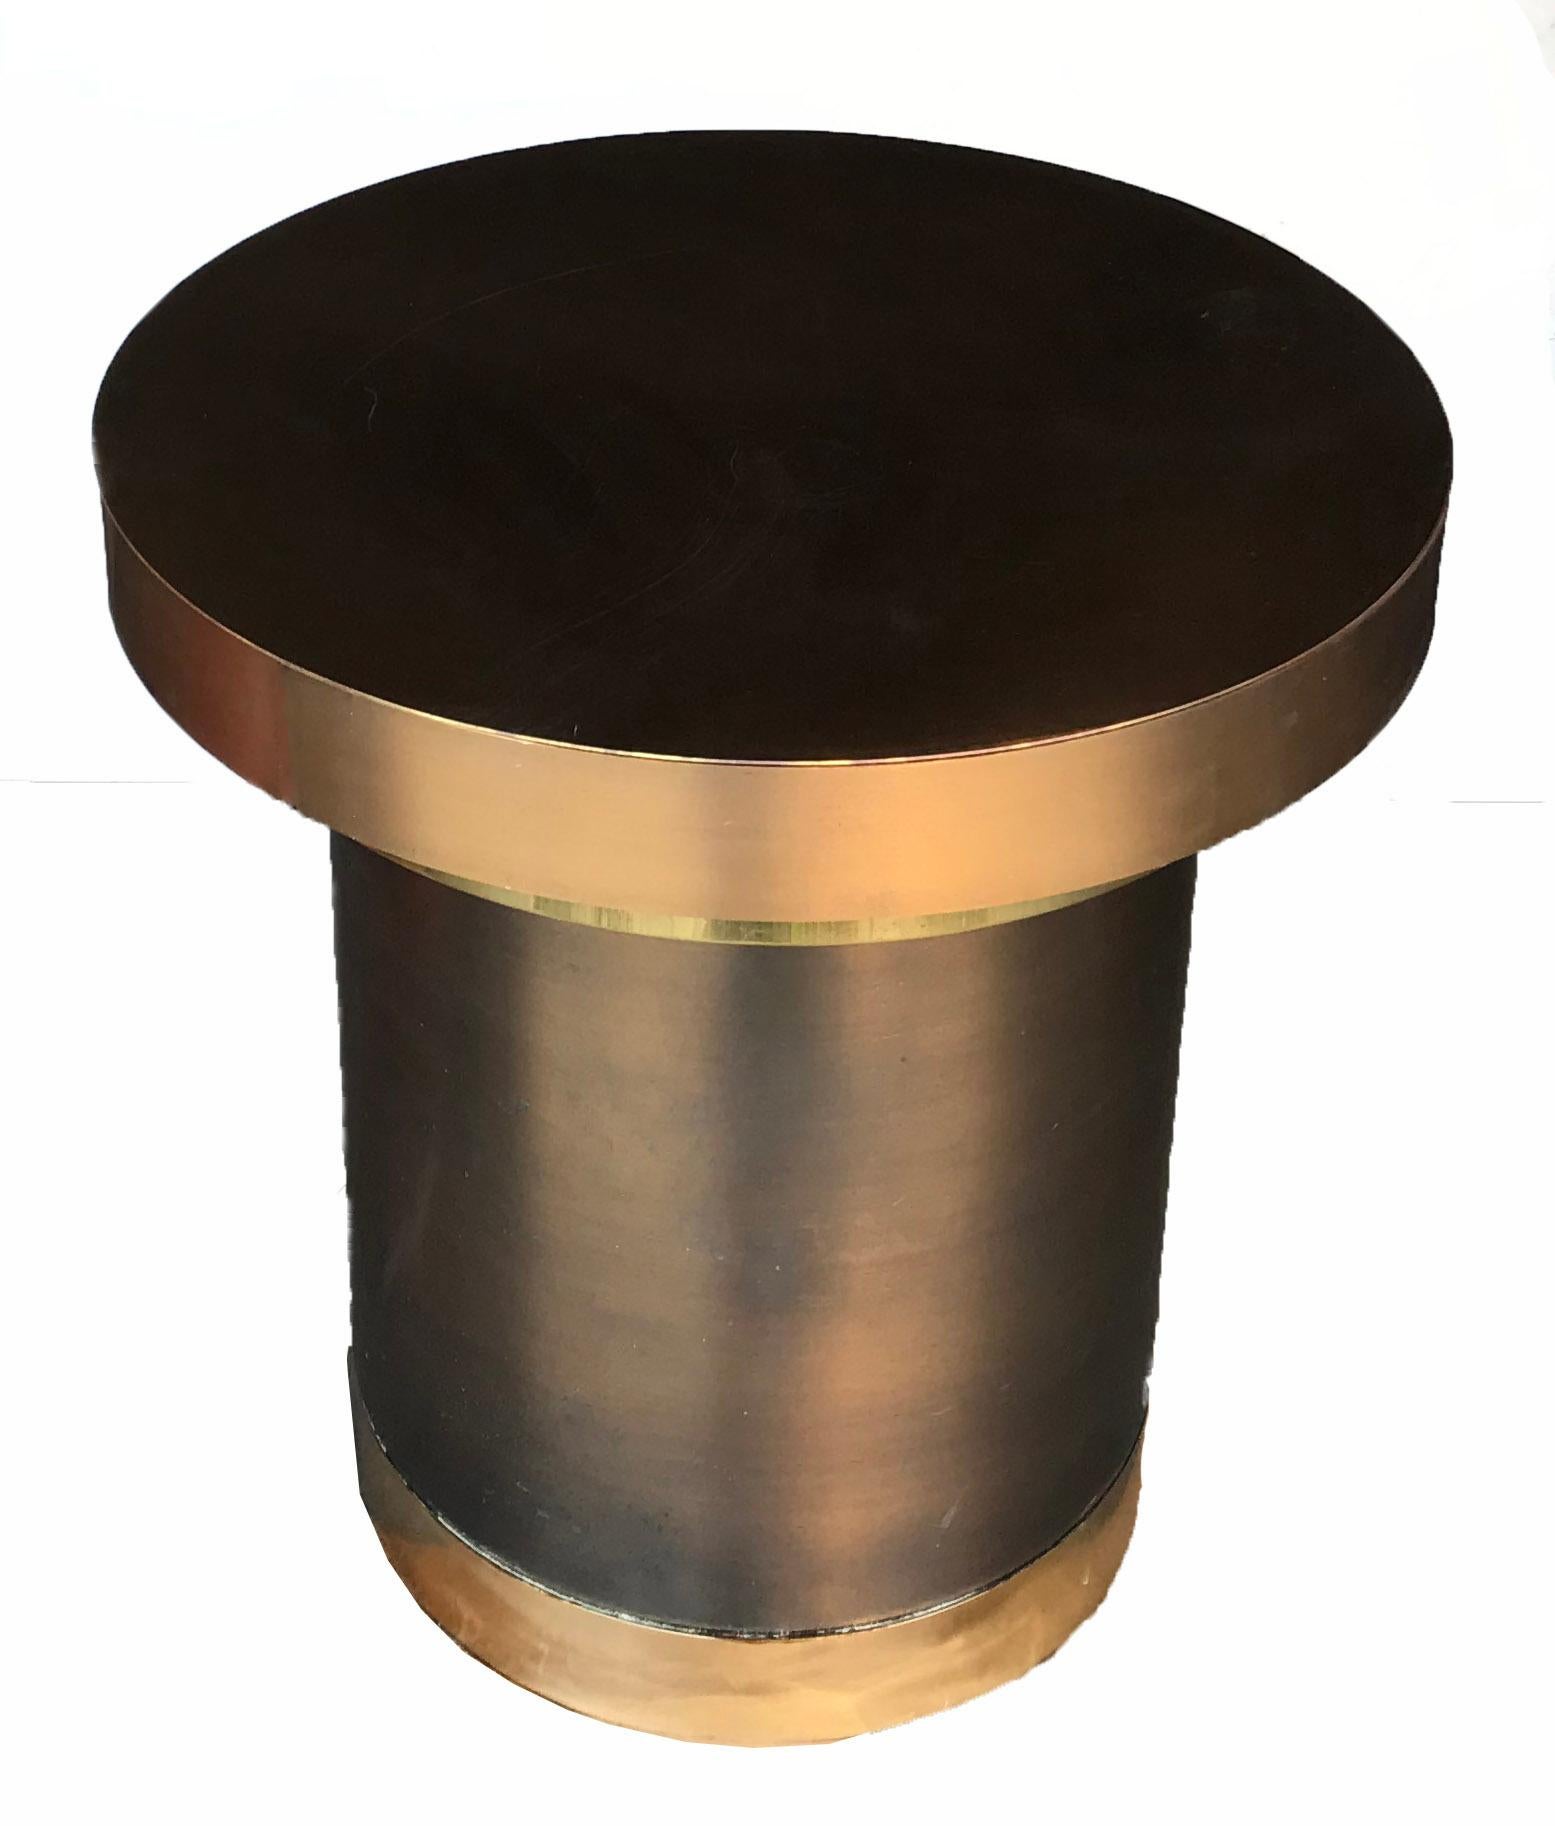 Superb table in the style of Karl Springer , brush brass and polished brassdrum base,
brown smoked round glass.

Measures: 26